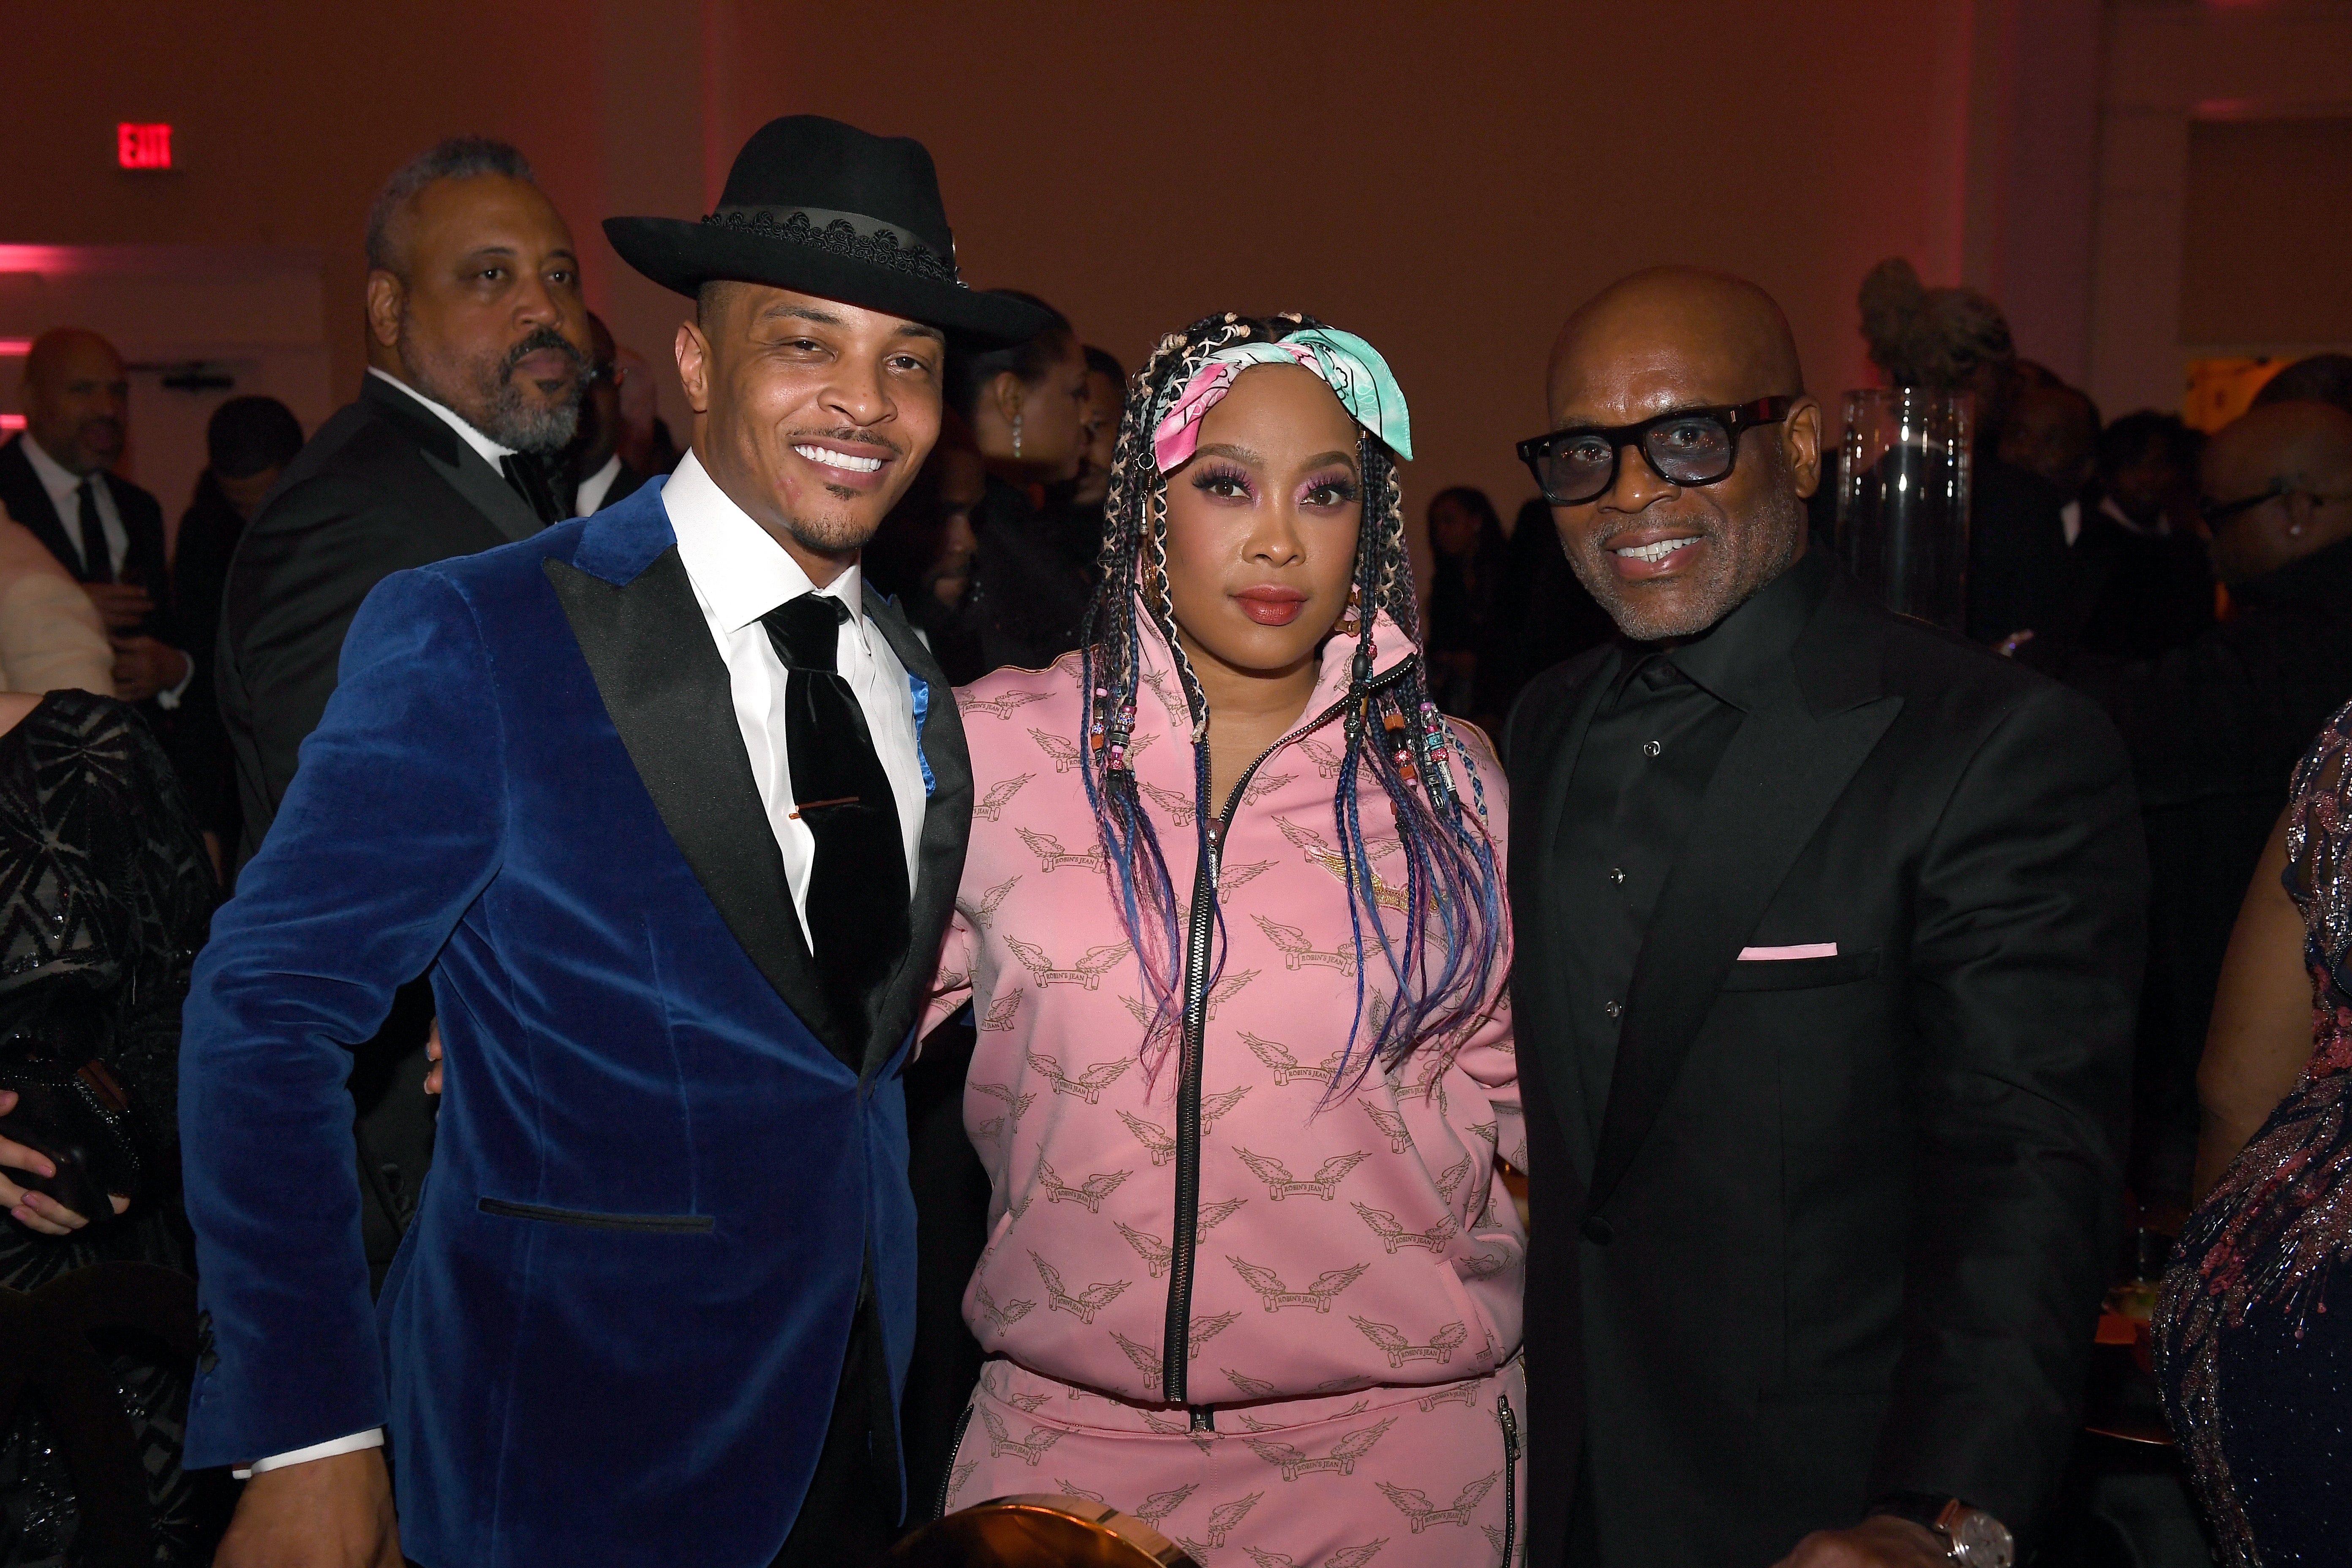 It Seems Every Black Celebrity In Atlanta Gathered To Honor LaFace Records At YouTube Music's Leaders & Legends Ball